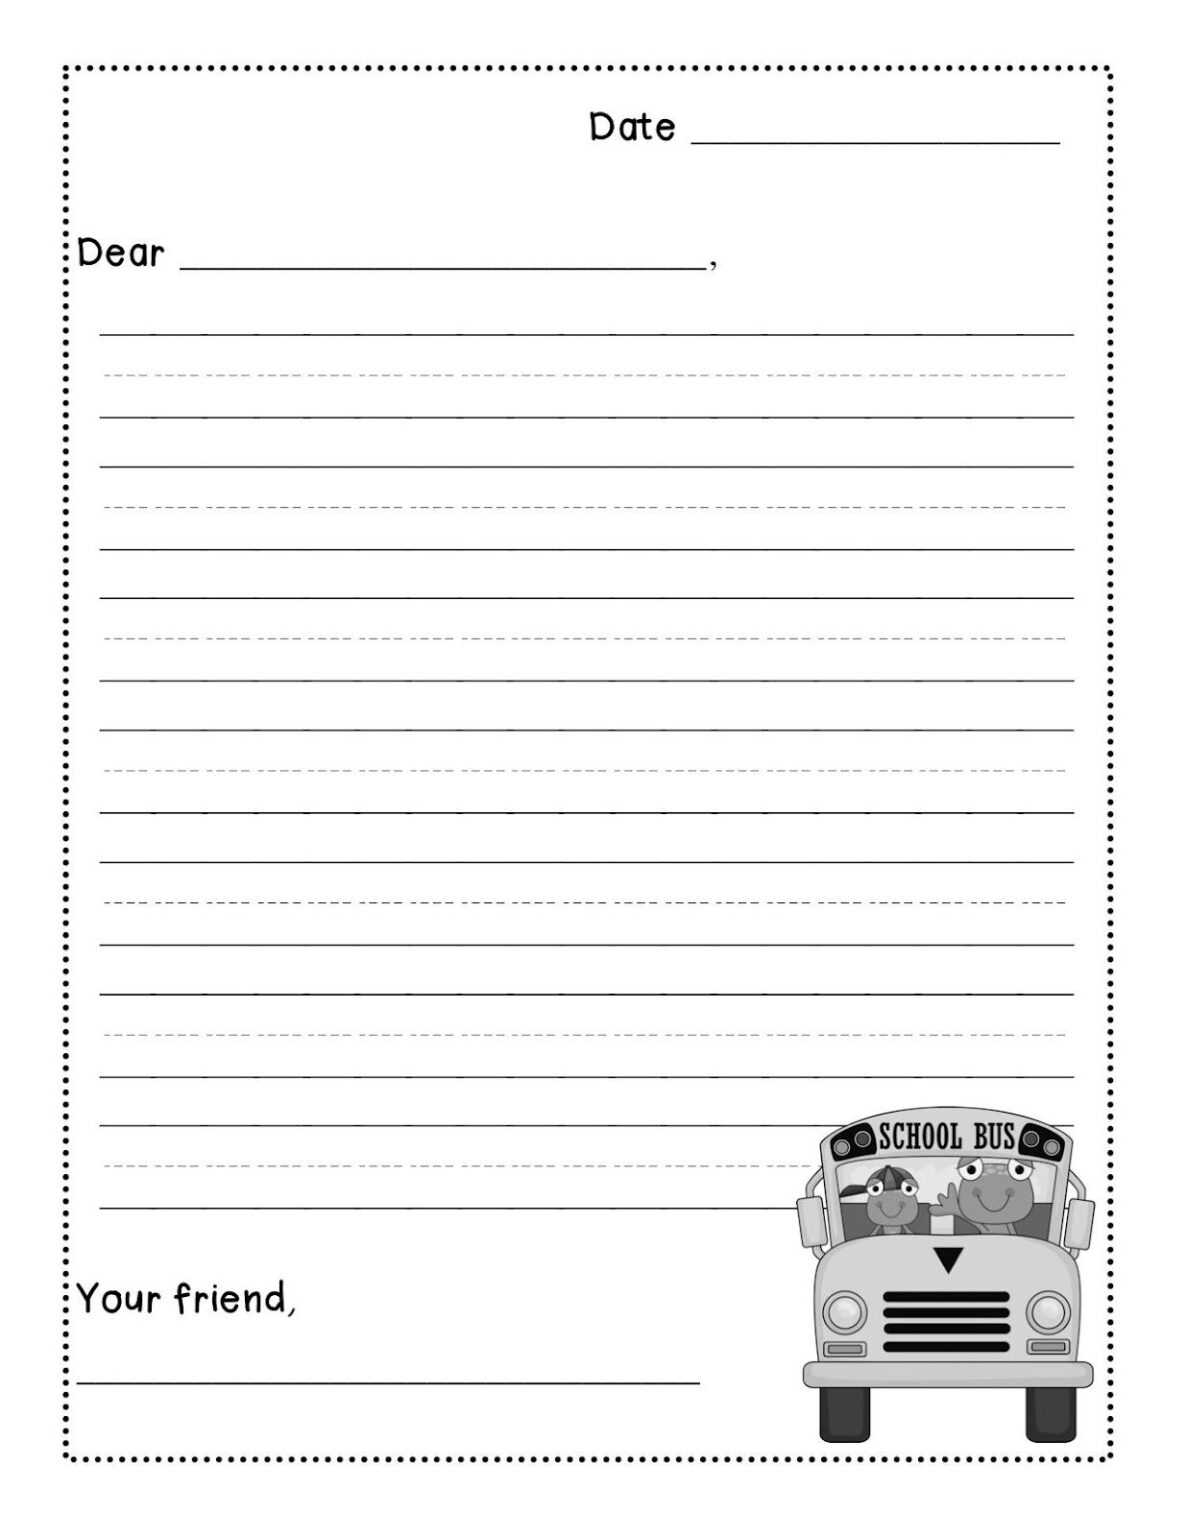 writing-mini-lesson-32-cups-to-edit-writing-mini-lessons-teaching-writing-friendly-letter